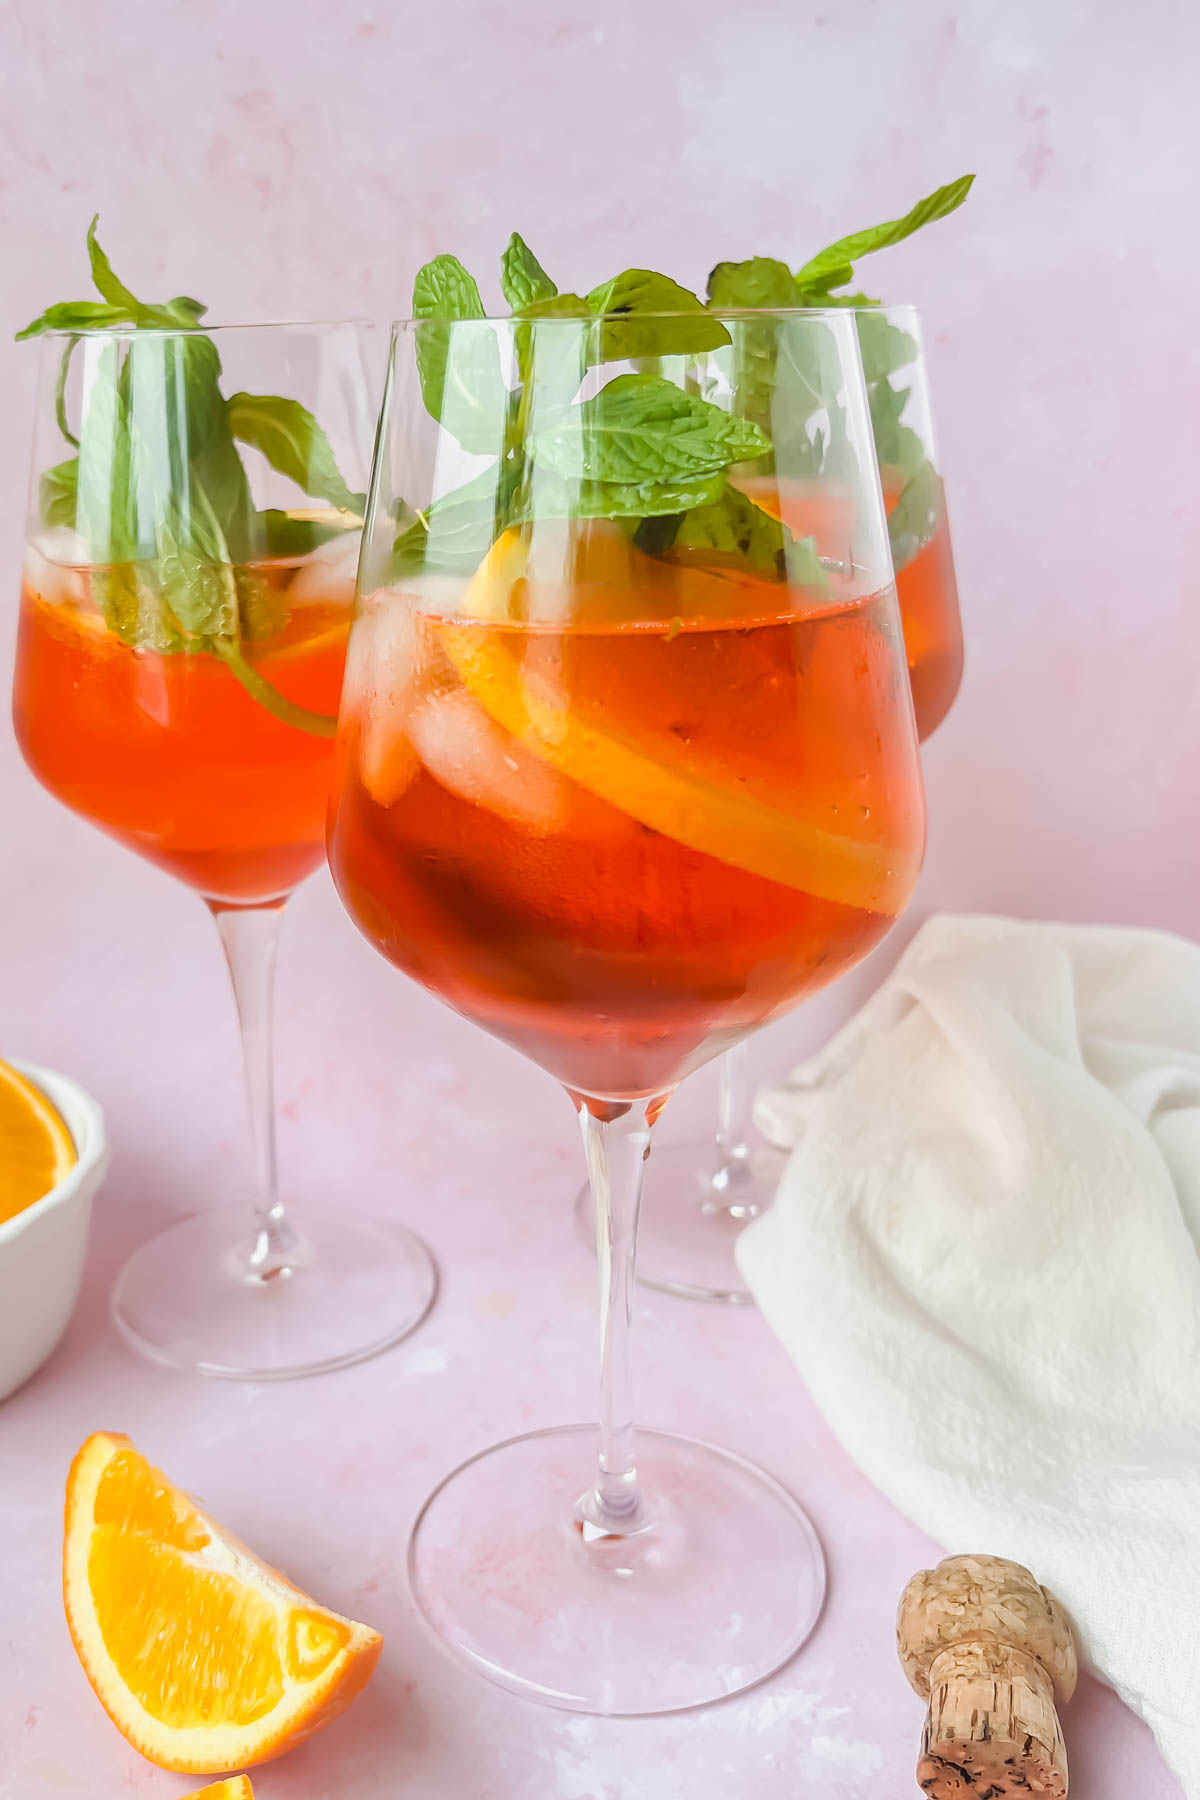 3 rosé aperol spritzes in wine glasses garnished with orange slices and mint leaves.